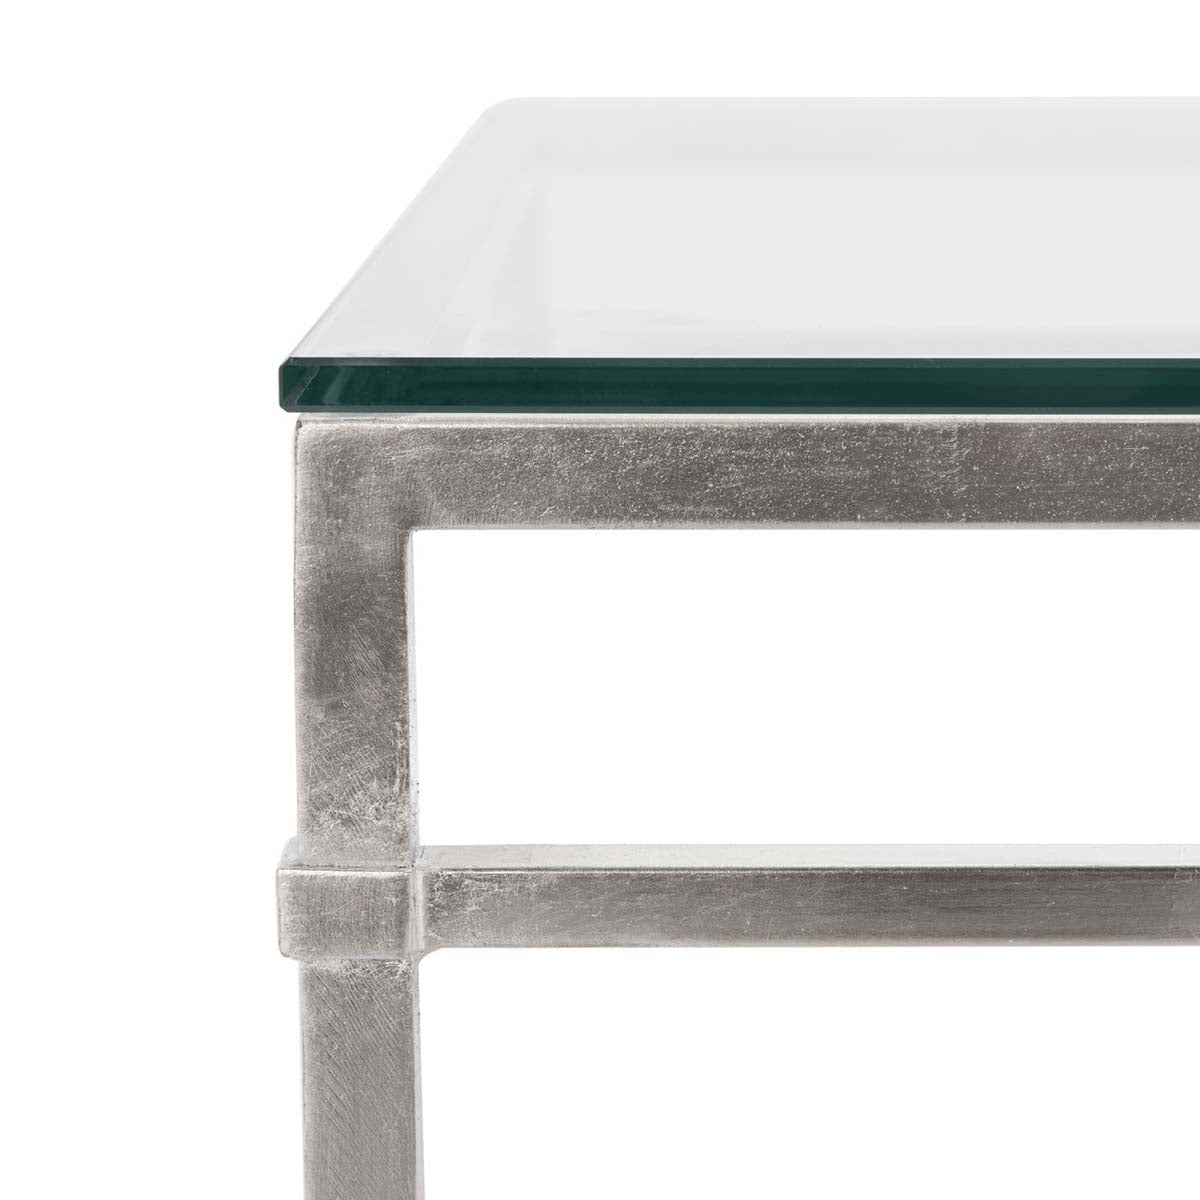 Safavieh Couture Abelard Glass Cocktail Table - Silver / Glass